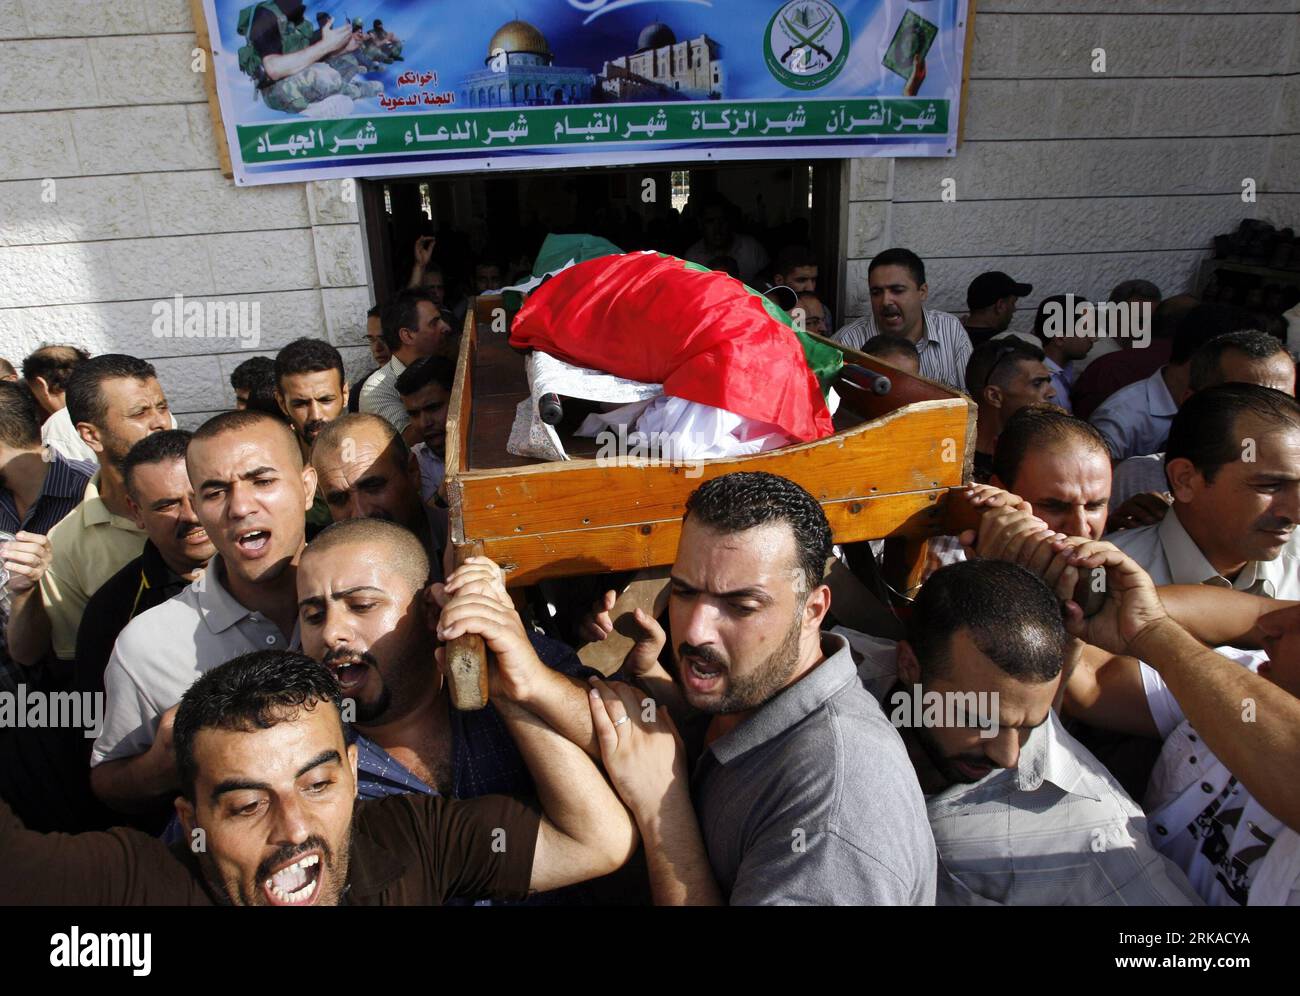 Bildnummer: 54312581  Datum: 18.08.2010  Copyright: imago/Xinhua (100818) -- GAZA, Aug. 18, 2010 (Xinhua) -- Palestinian mourners carry the body of former Palestinian intelligence chief Amin al-Hindi during his funeral in Gaza City, on Aug. 18, 2010. Al-Hindi, the president s advisor for security affairs, tied to the 1972 Munich Olympic massacre, died on Tuesday when he was being treated for cancer in the Jordanian capital of Amman. (Xinhua/Wissam Nassar) (lyi) MIDEAST-GAZA-FUNERAL-AL-HINDI PUBLICATIONxNOTxINxCHN People Palästina Trauerfeier Beerdigung kbdig xsk 2010 quer o0 Trauer Leiche    B Stock Photo